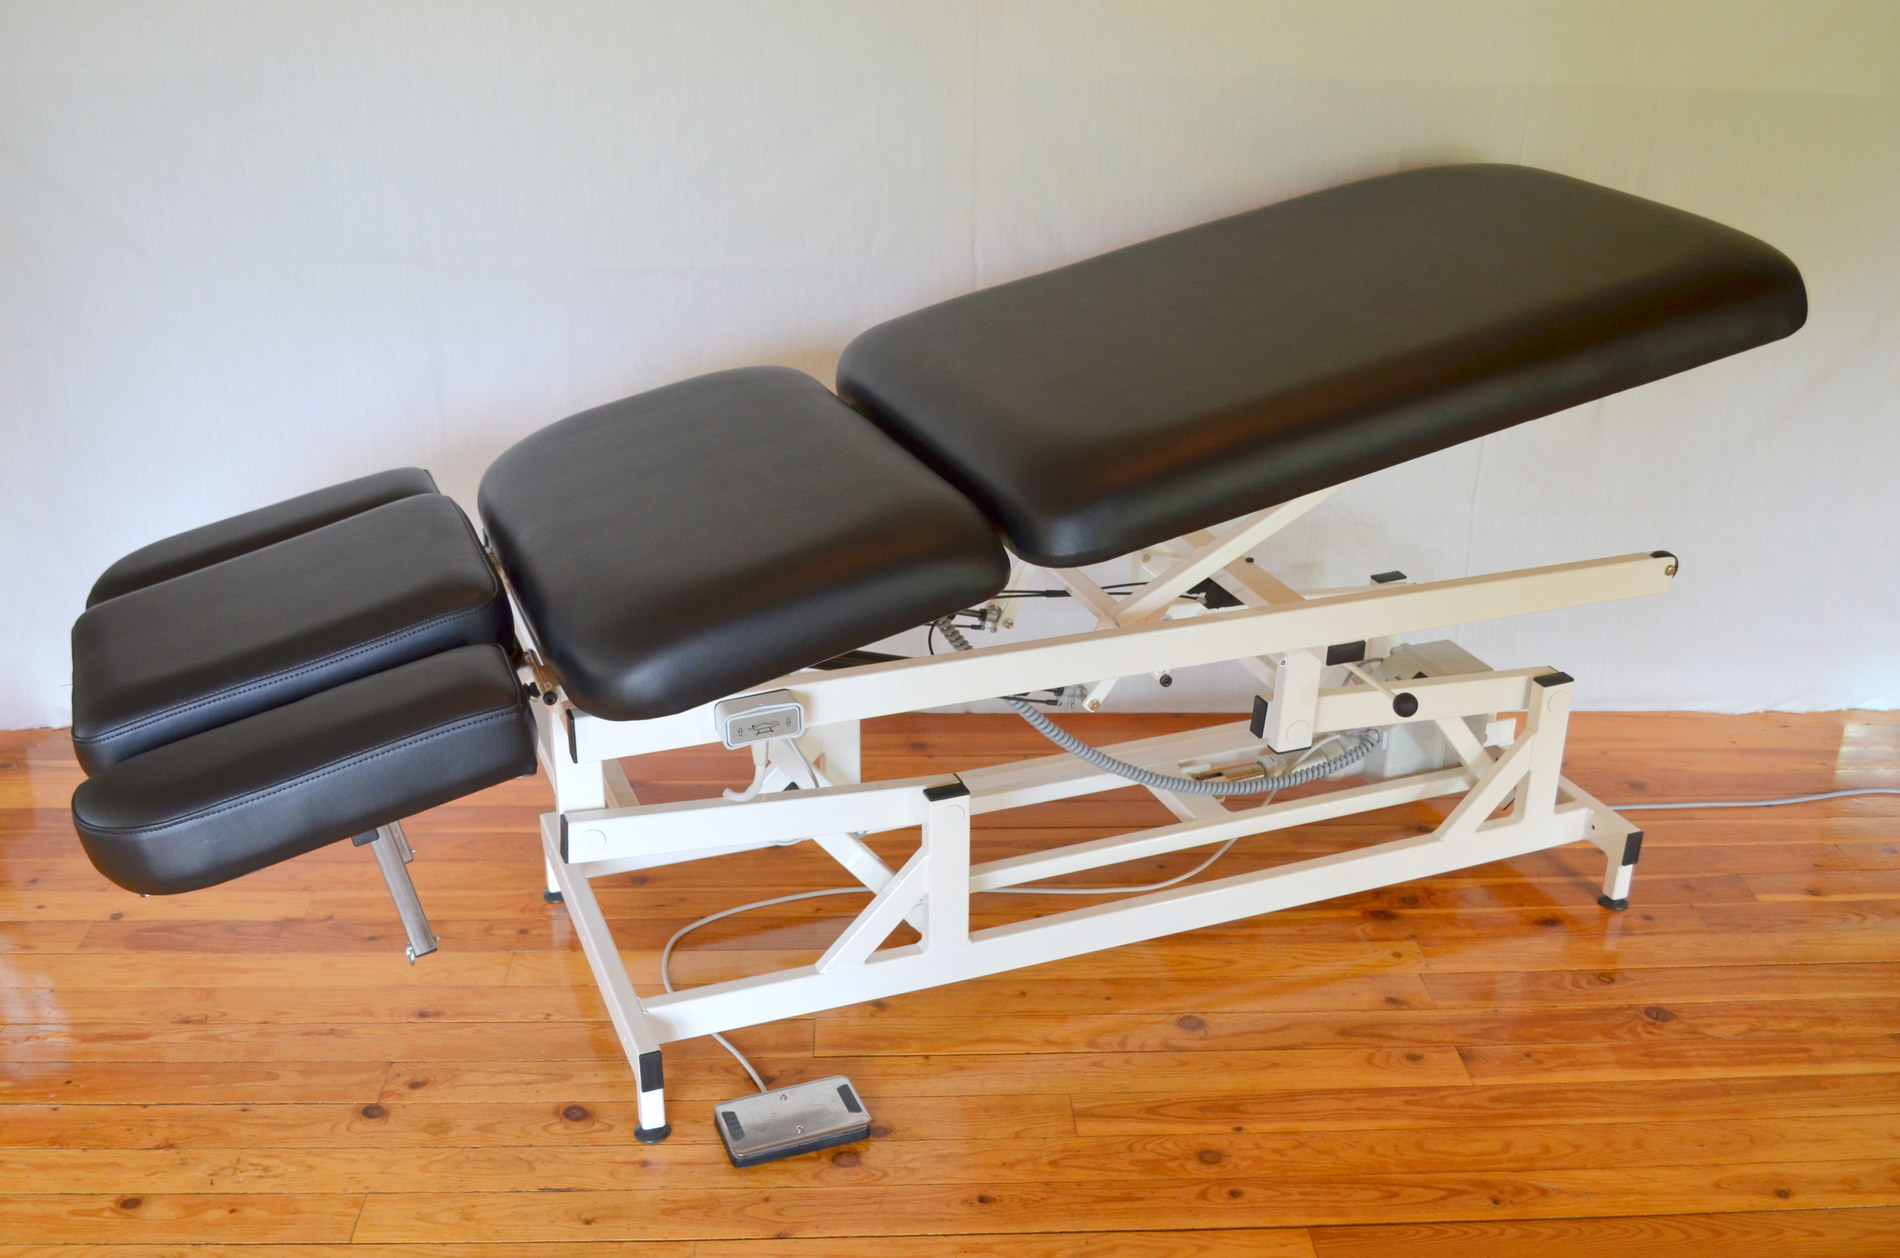 Reha-med manual therapy table